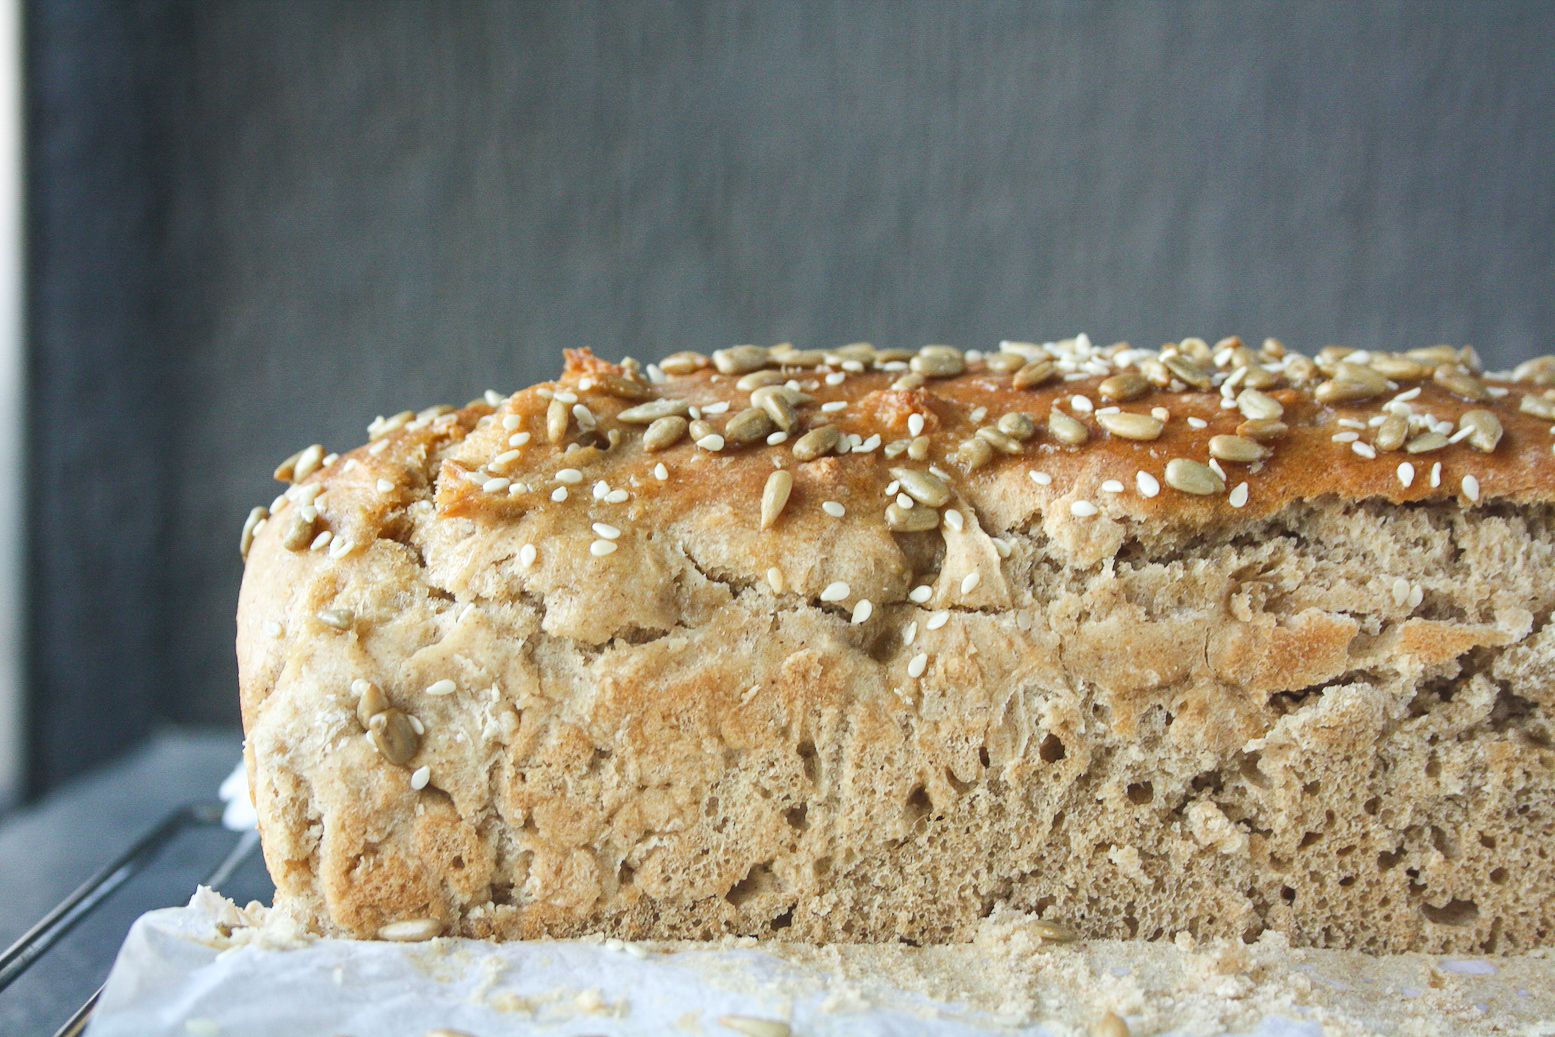 Soft and chewy homemade rye bread topped with sesame and sunflower seeds.